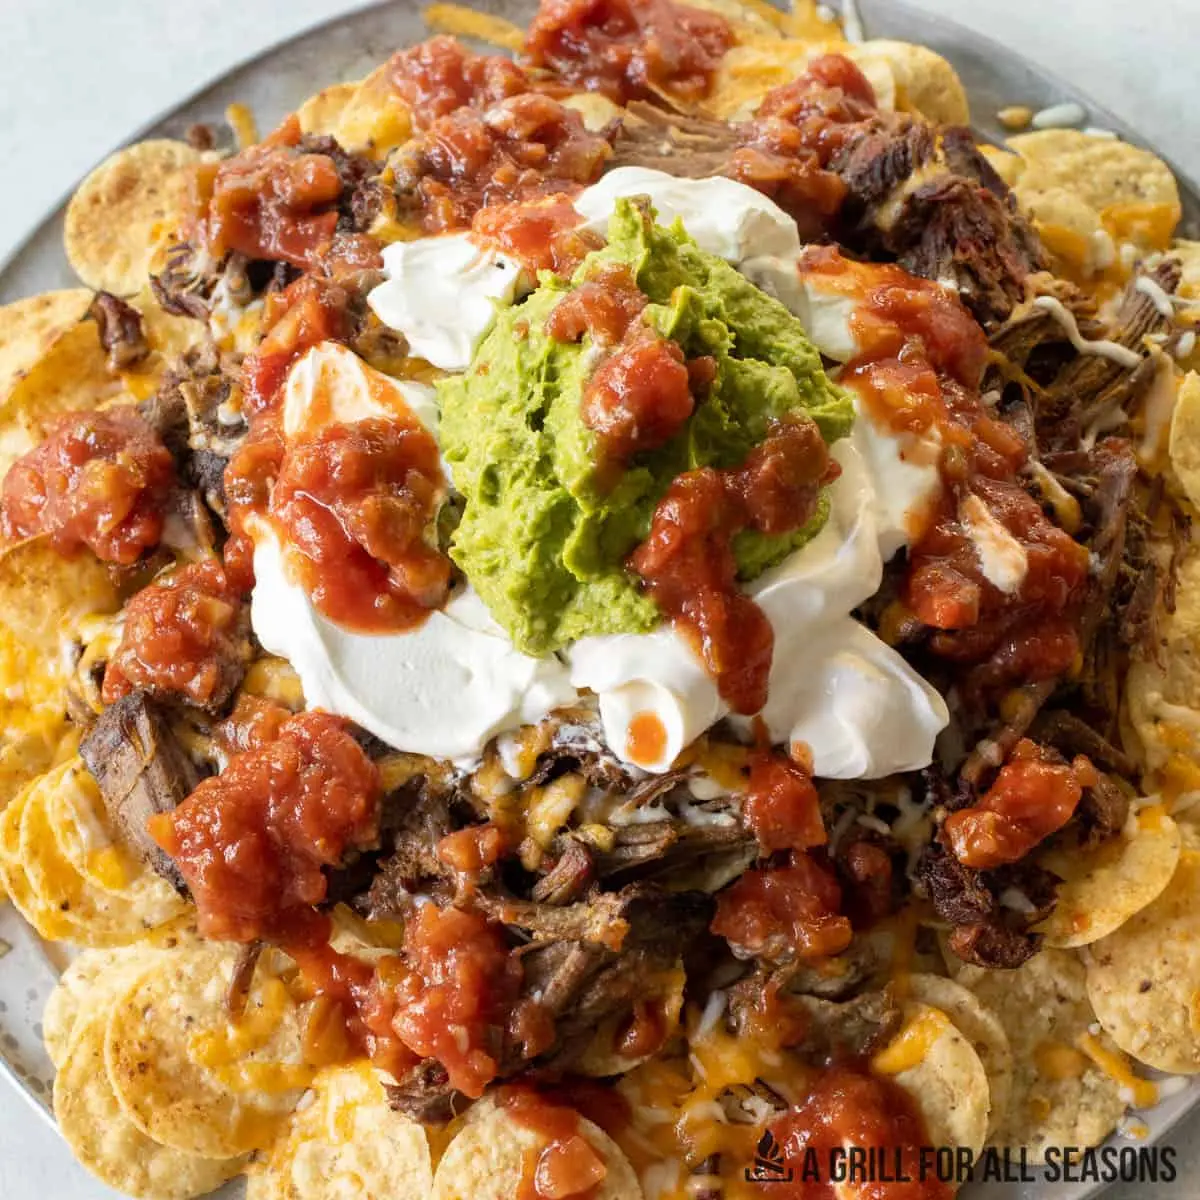 smoked beef nachos - What is beef nachos made of